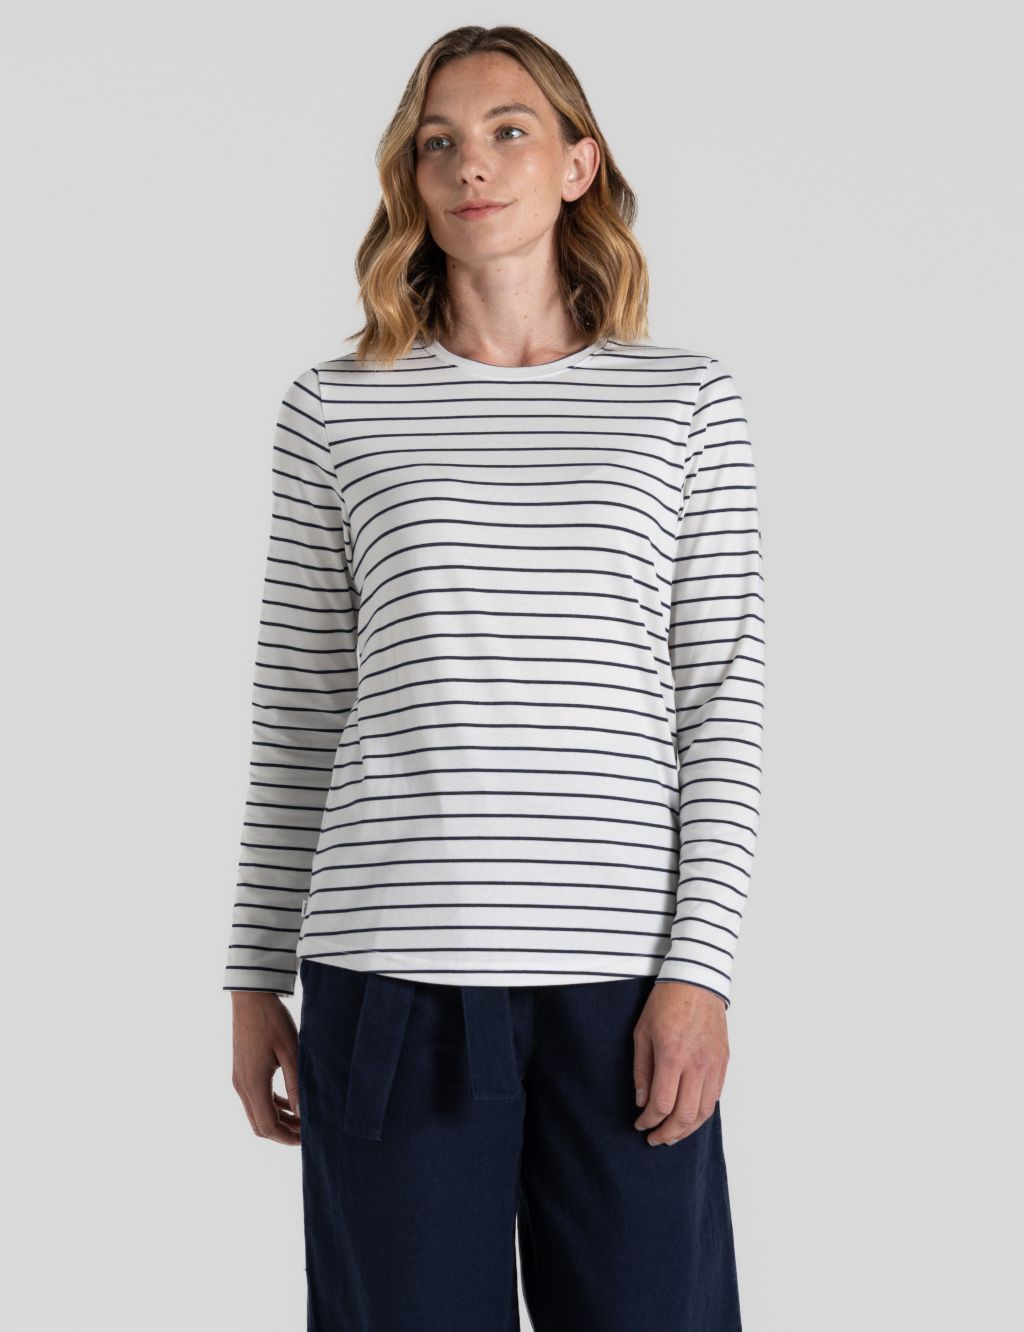 Striped Top with Cotton